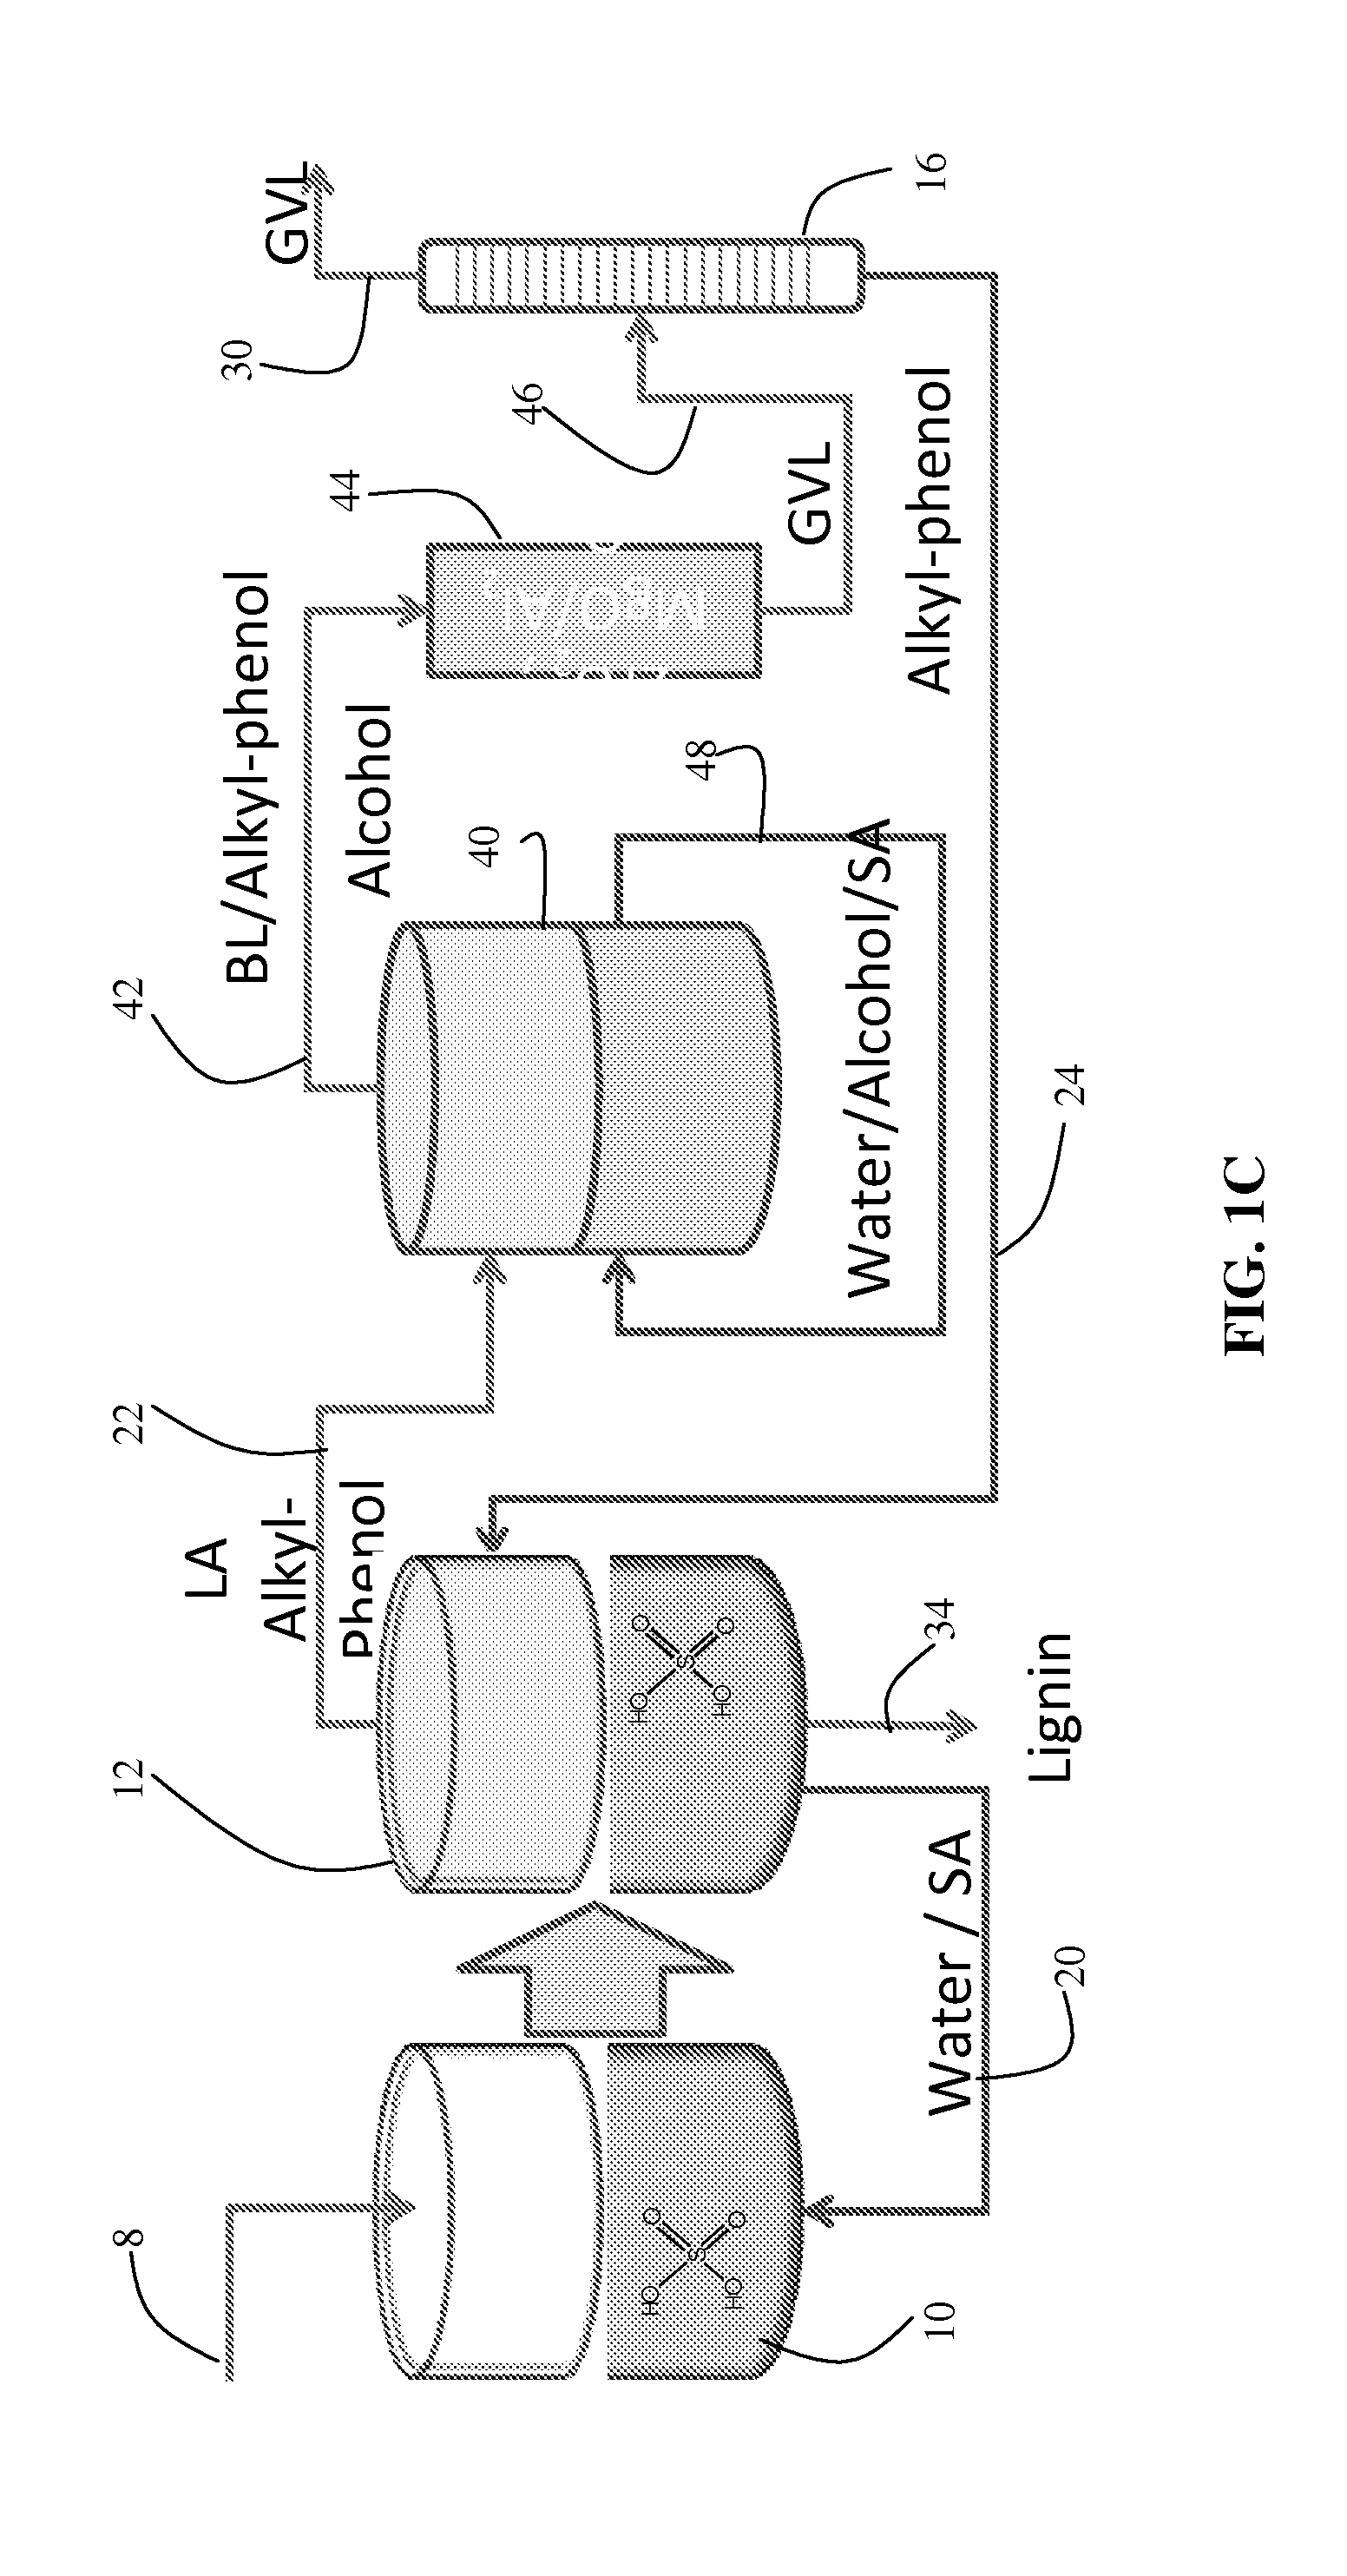 Method to produce and recover levulinic acid and/or gamma-valerolactone from aqueous solutions using alkylphenols